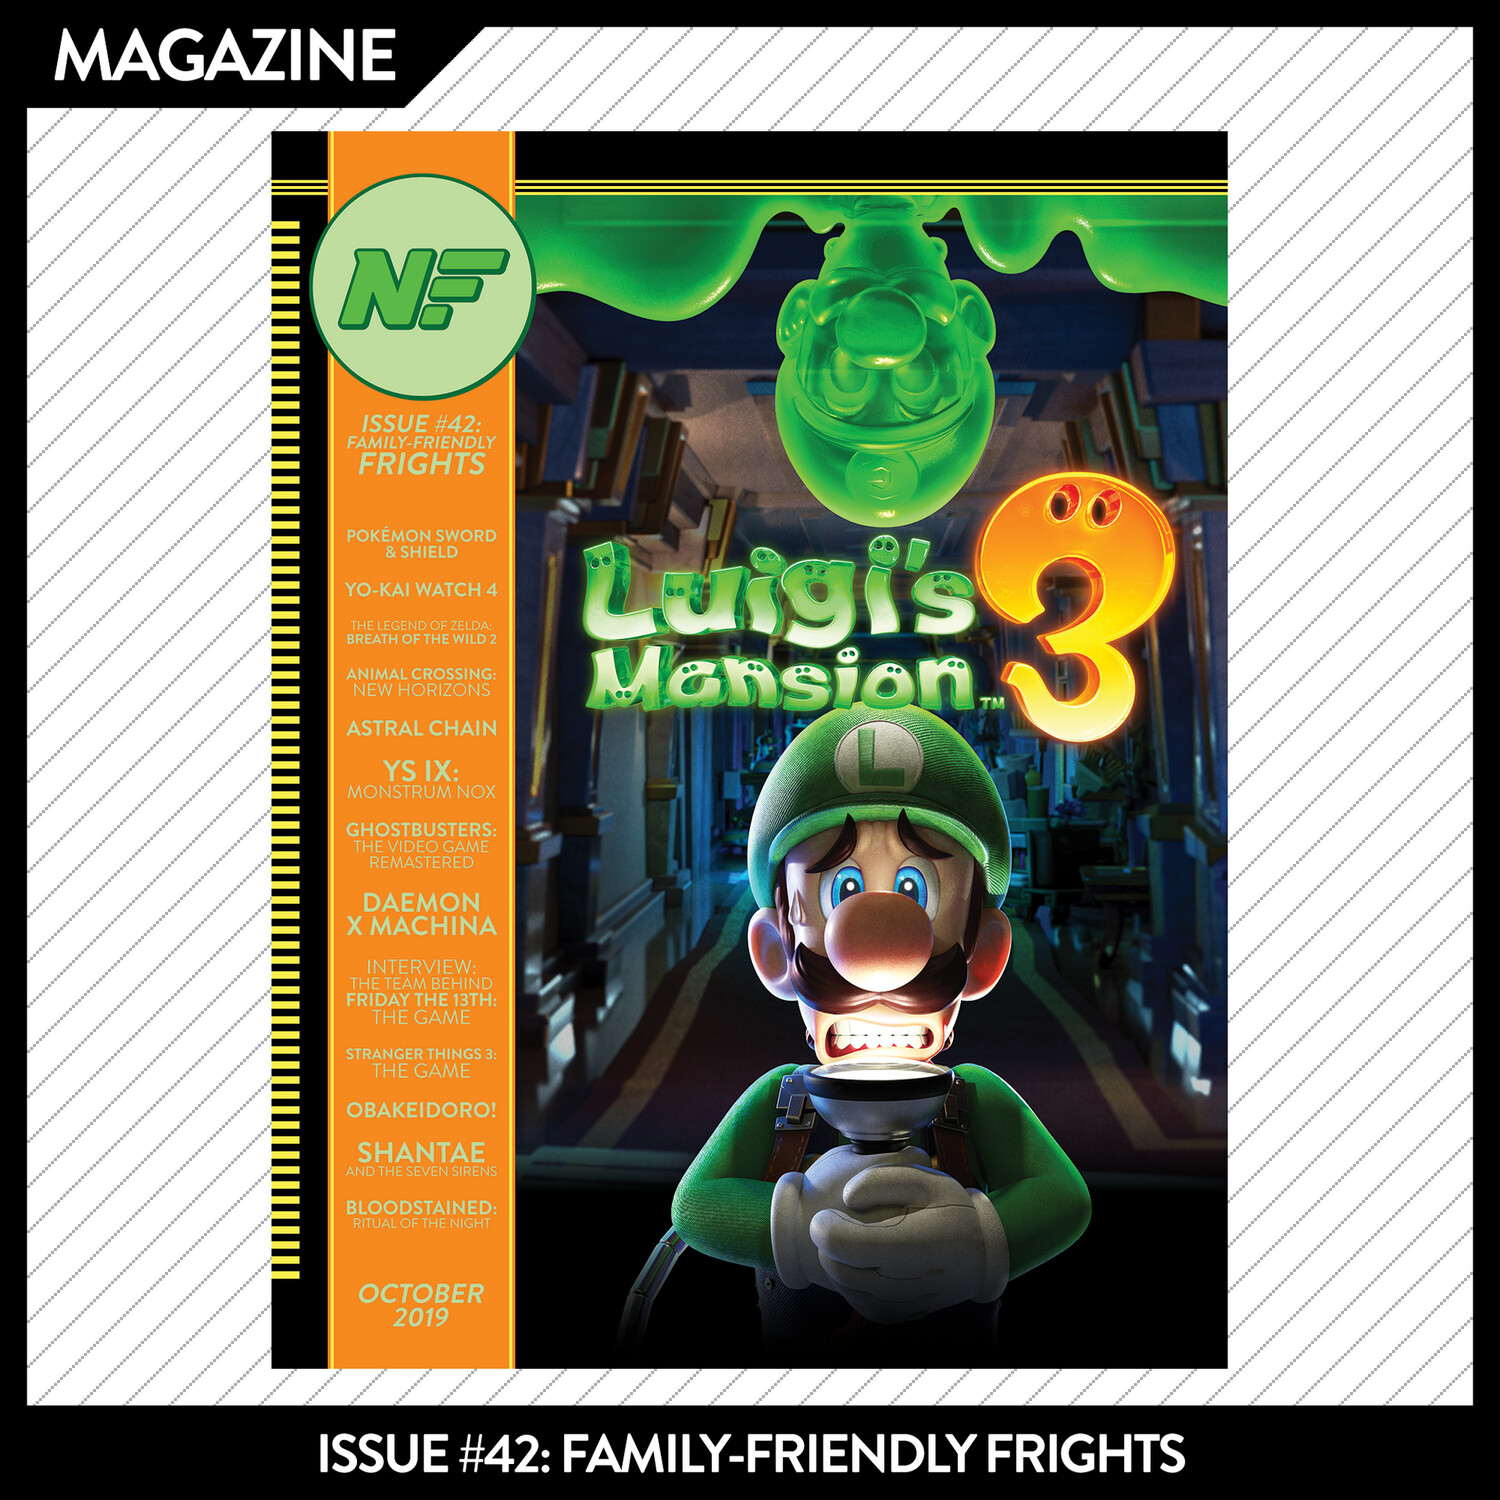 Issue #42: Family-Friendly Frights – October 2019